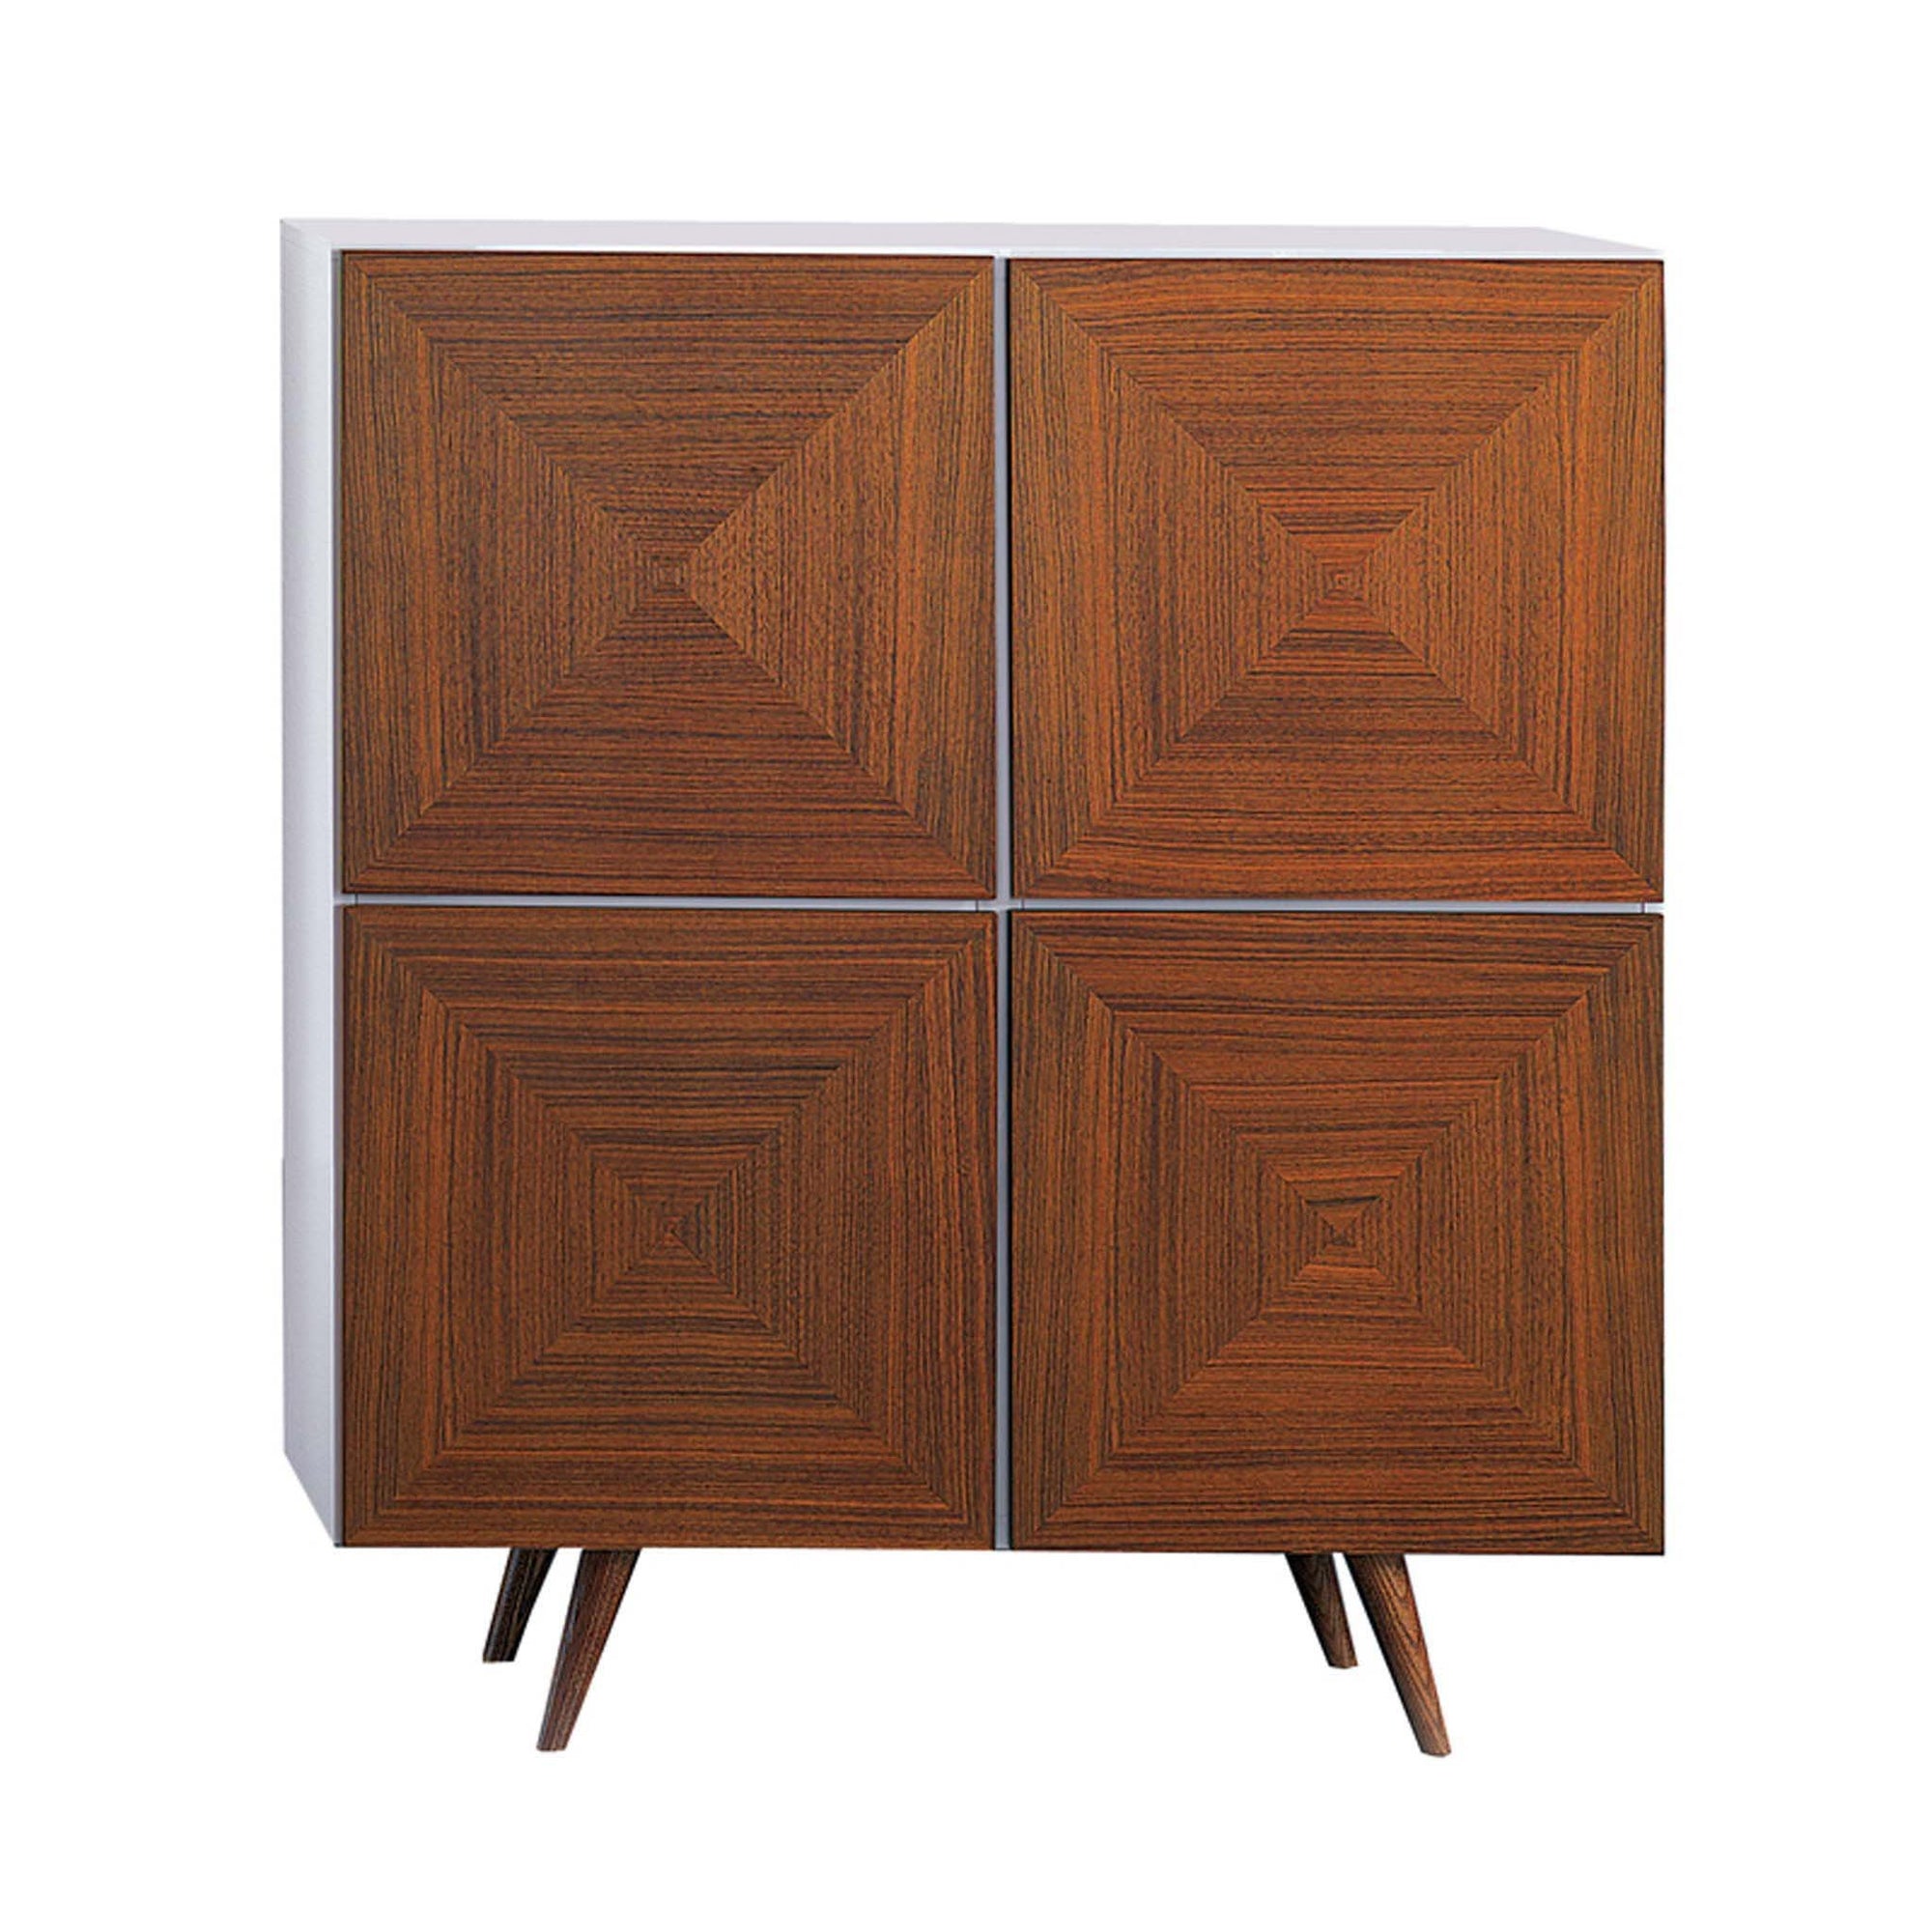 Bellini-City Cabinet in HG - Doors-Cabinet-MODTEMPO